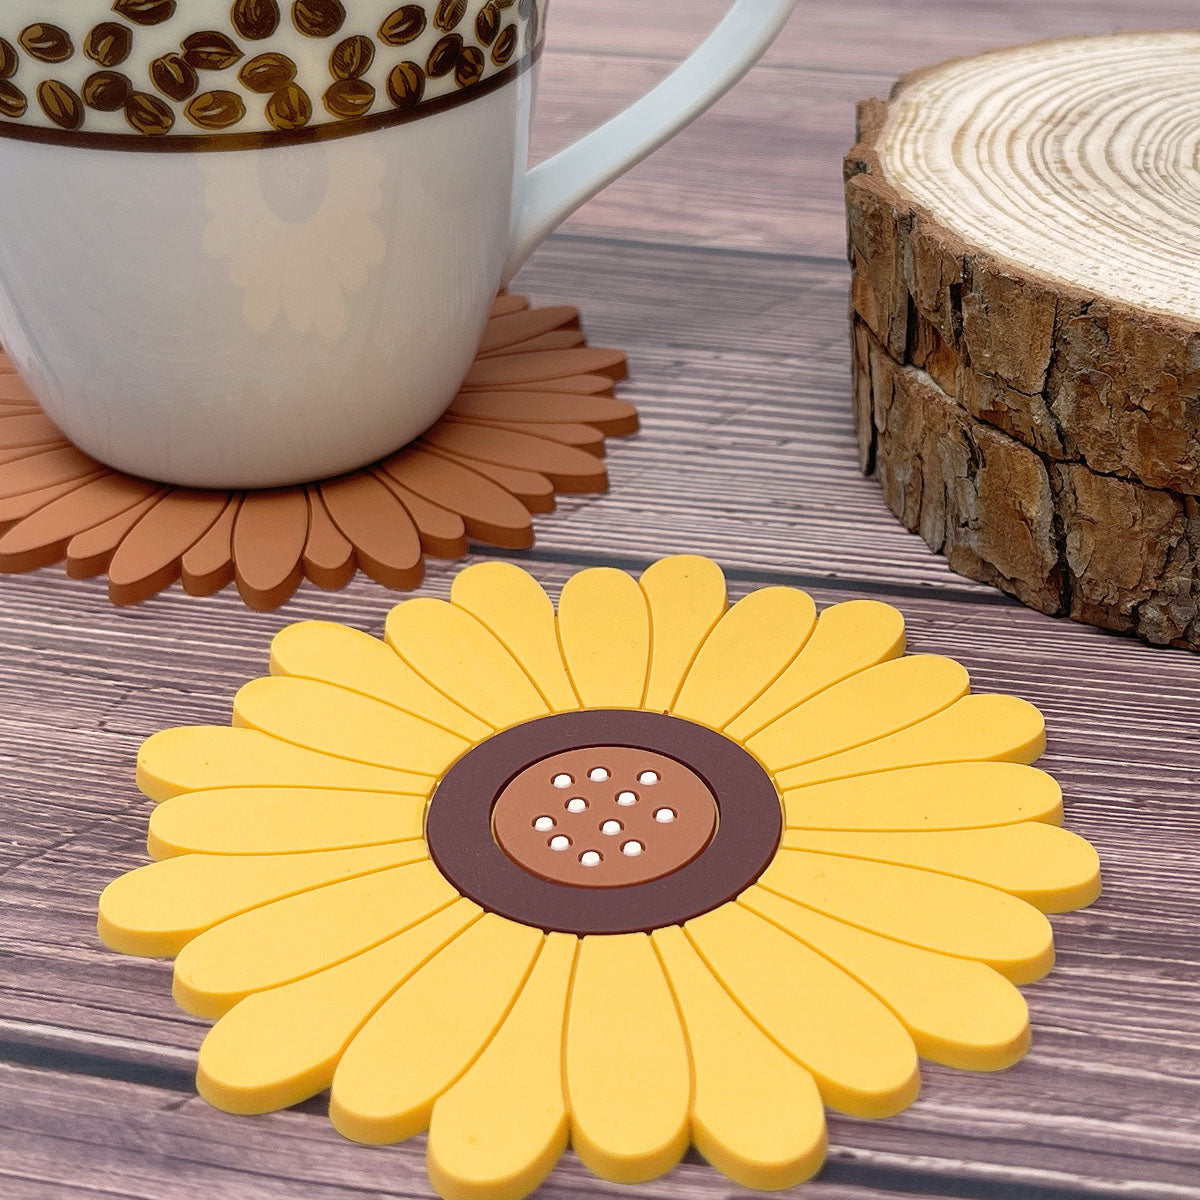 Wrapables Sunflower Coasters, Trivet Mats, Pot Holders for Cups, Drinks, Pots and Pans (Set of 2)